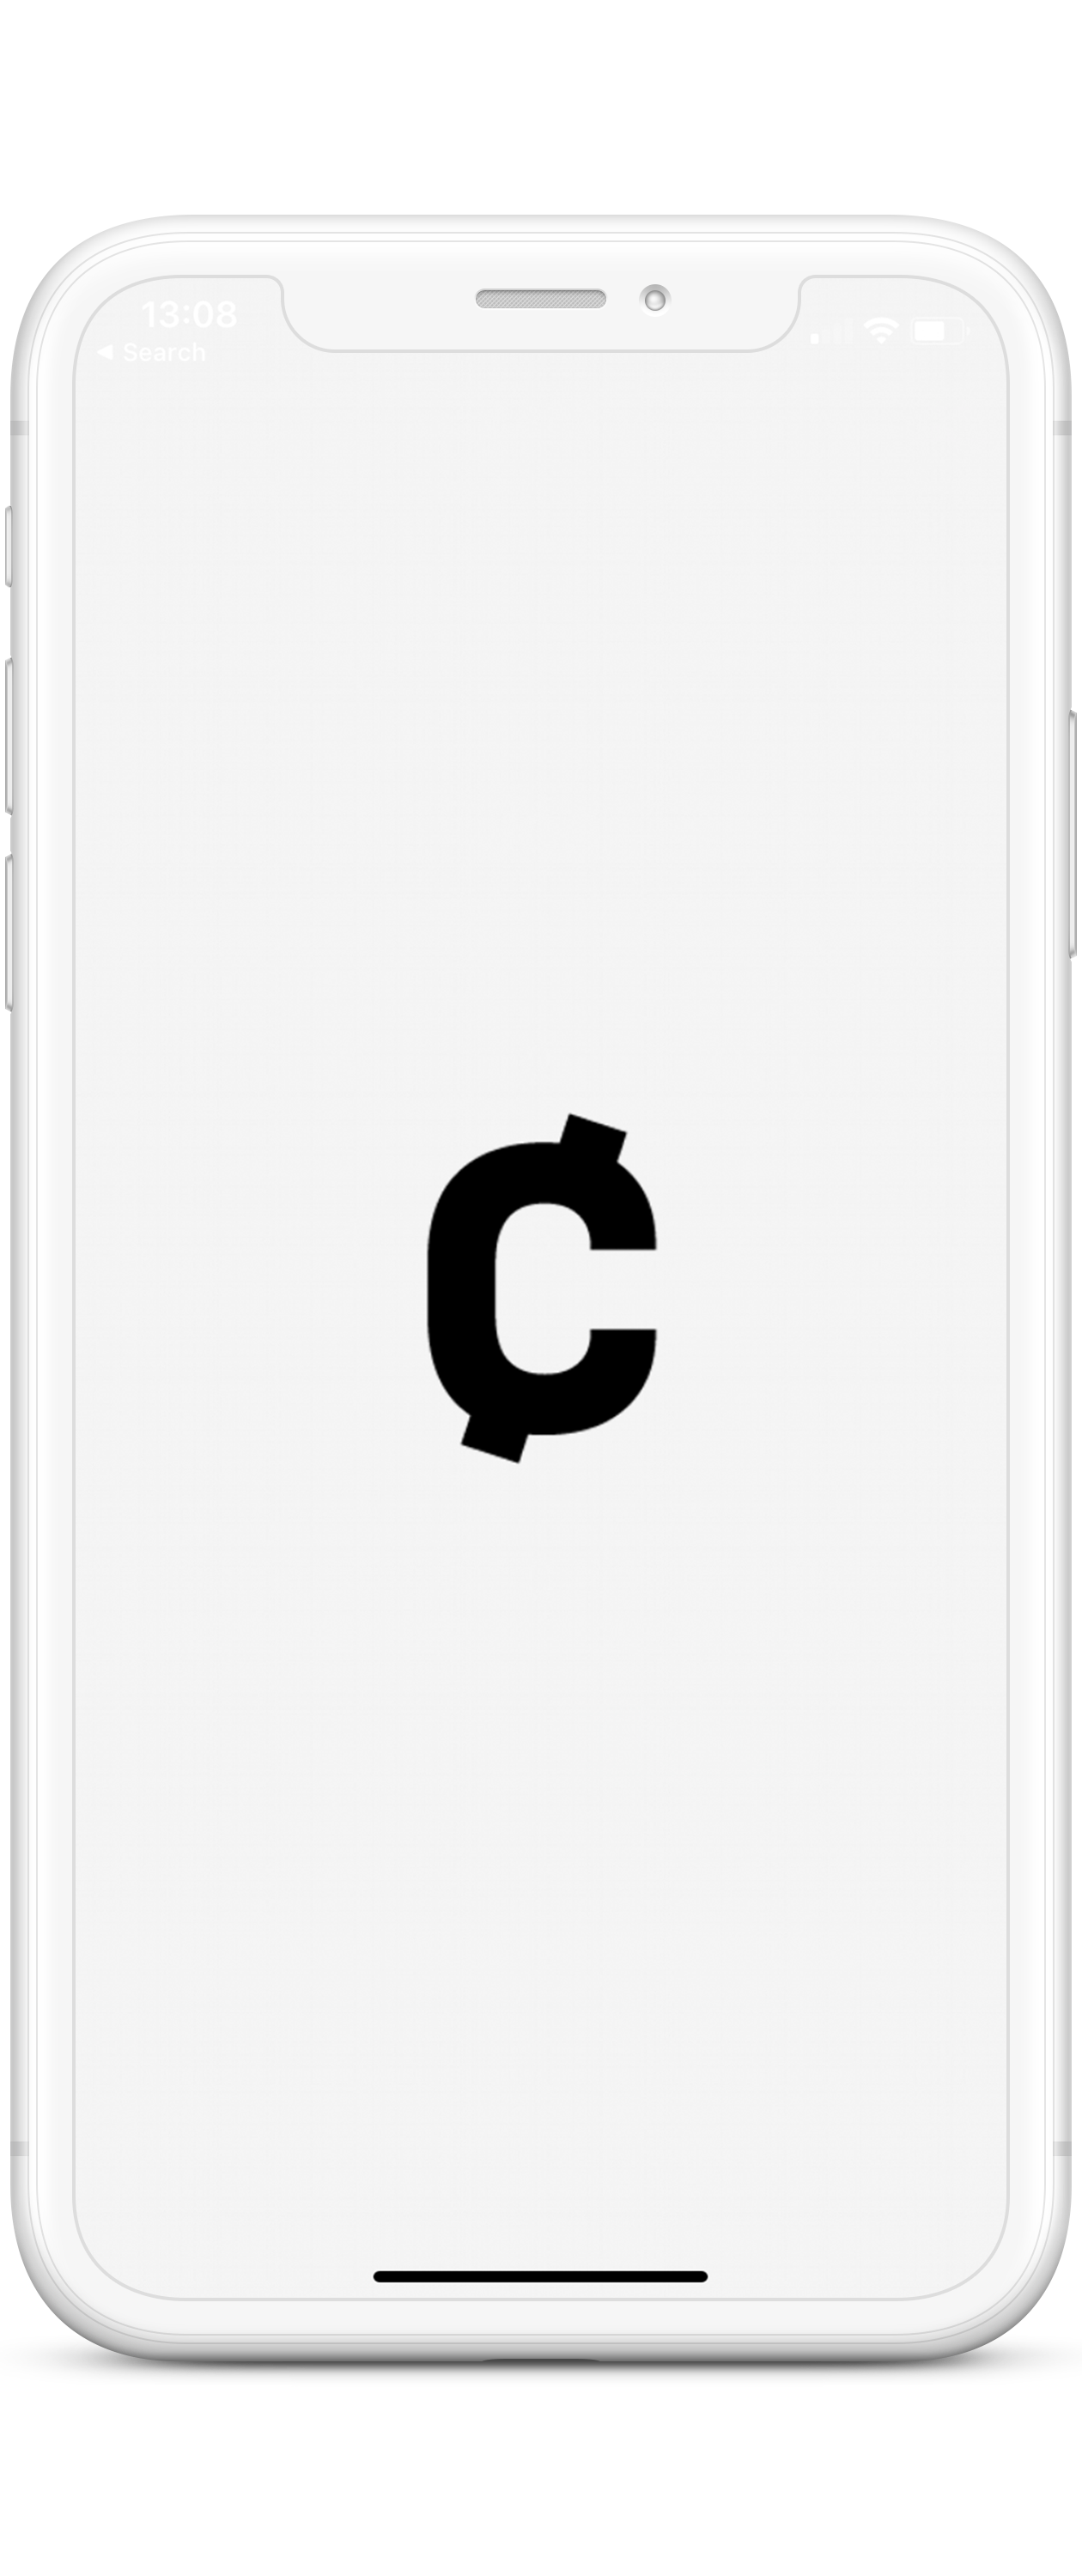 Cent Wallet image on iphone